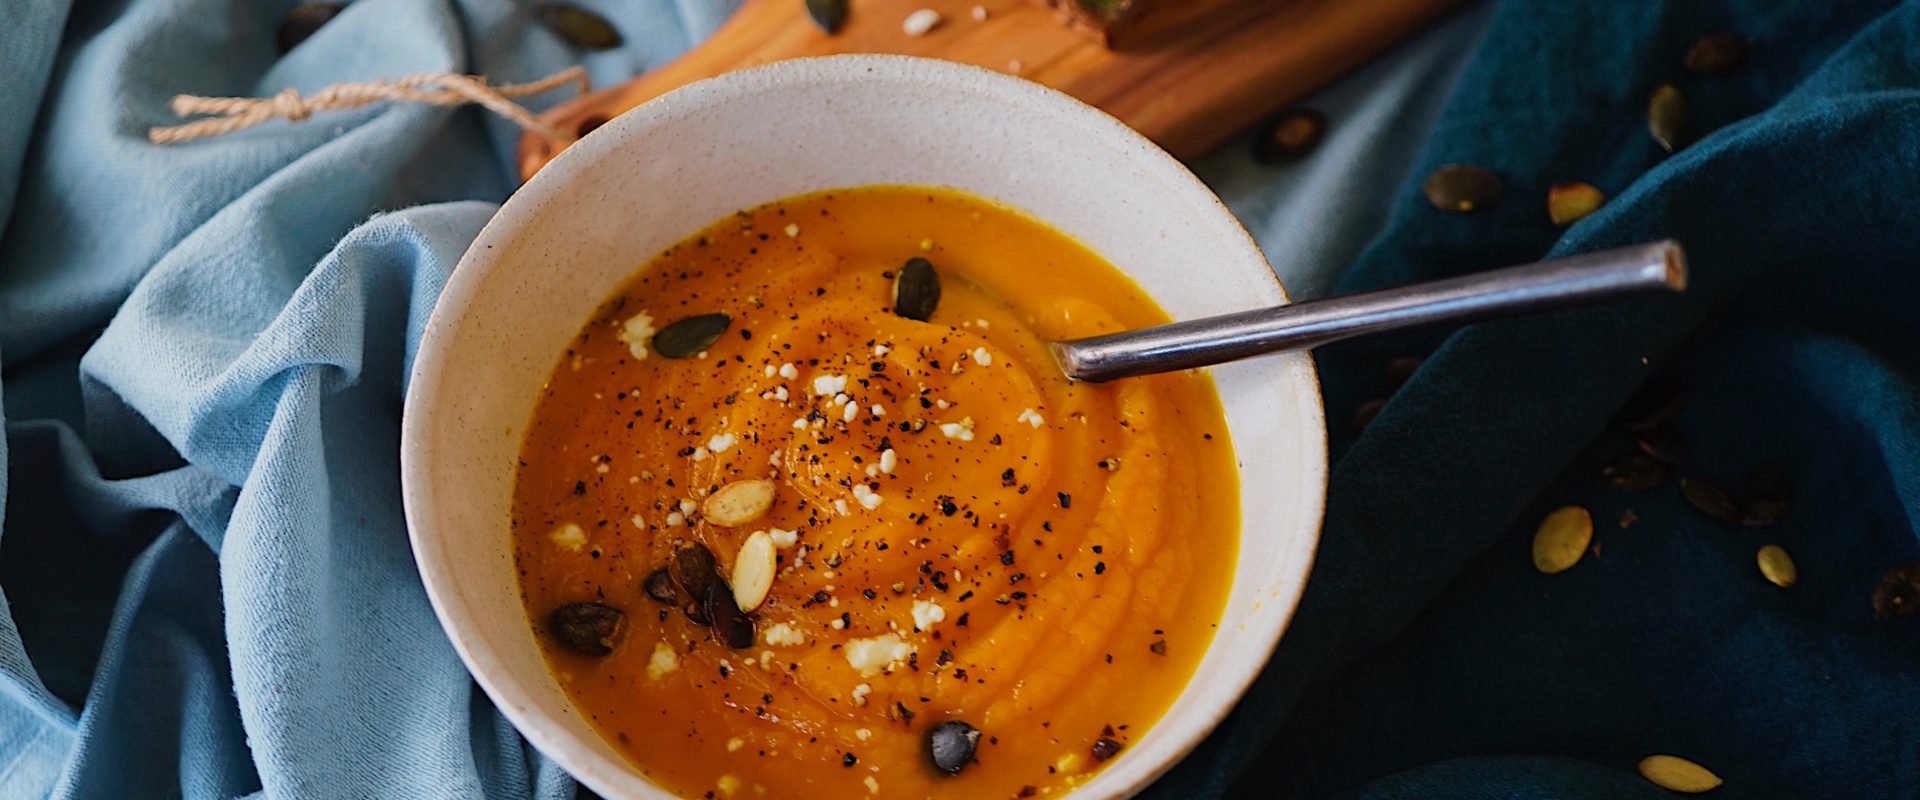 a bowl of soup with nuts and toasted bread